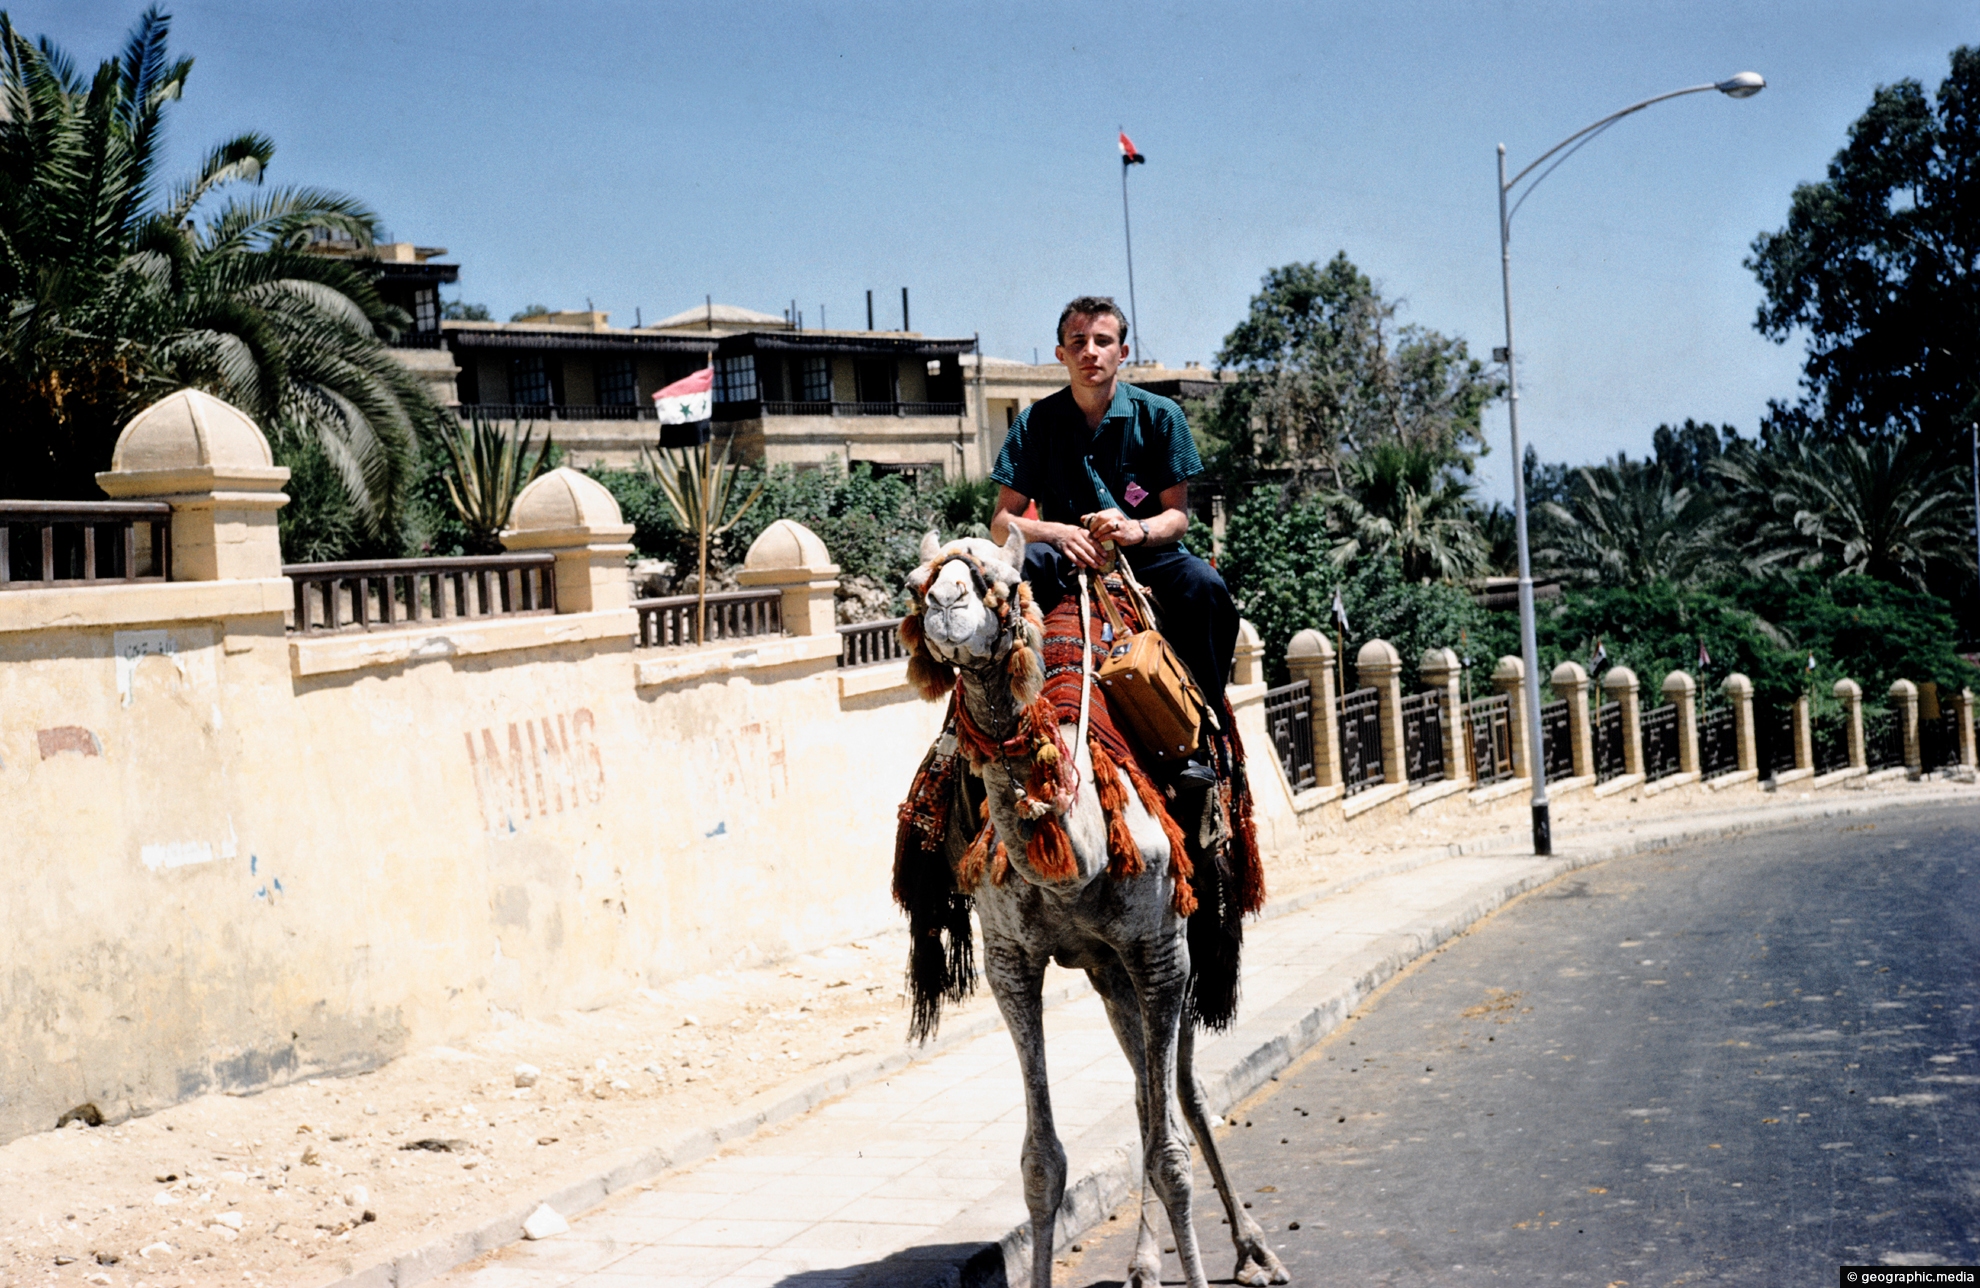 Camel ride in Cairo